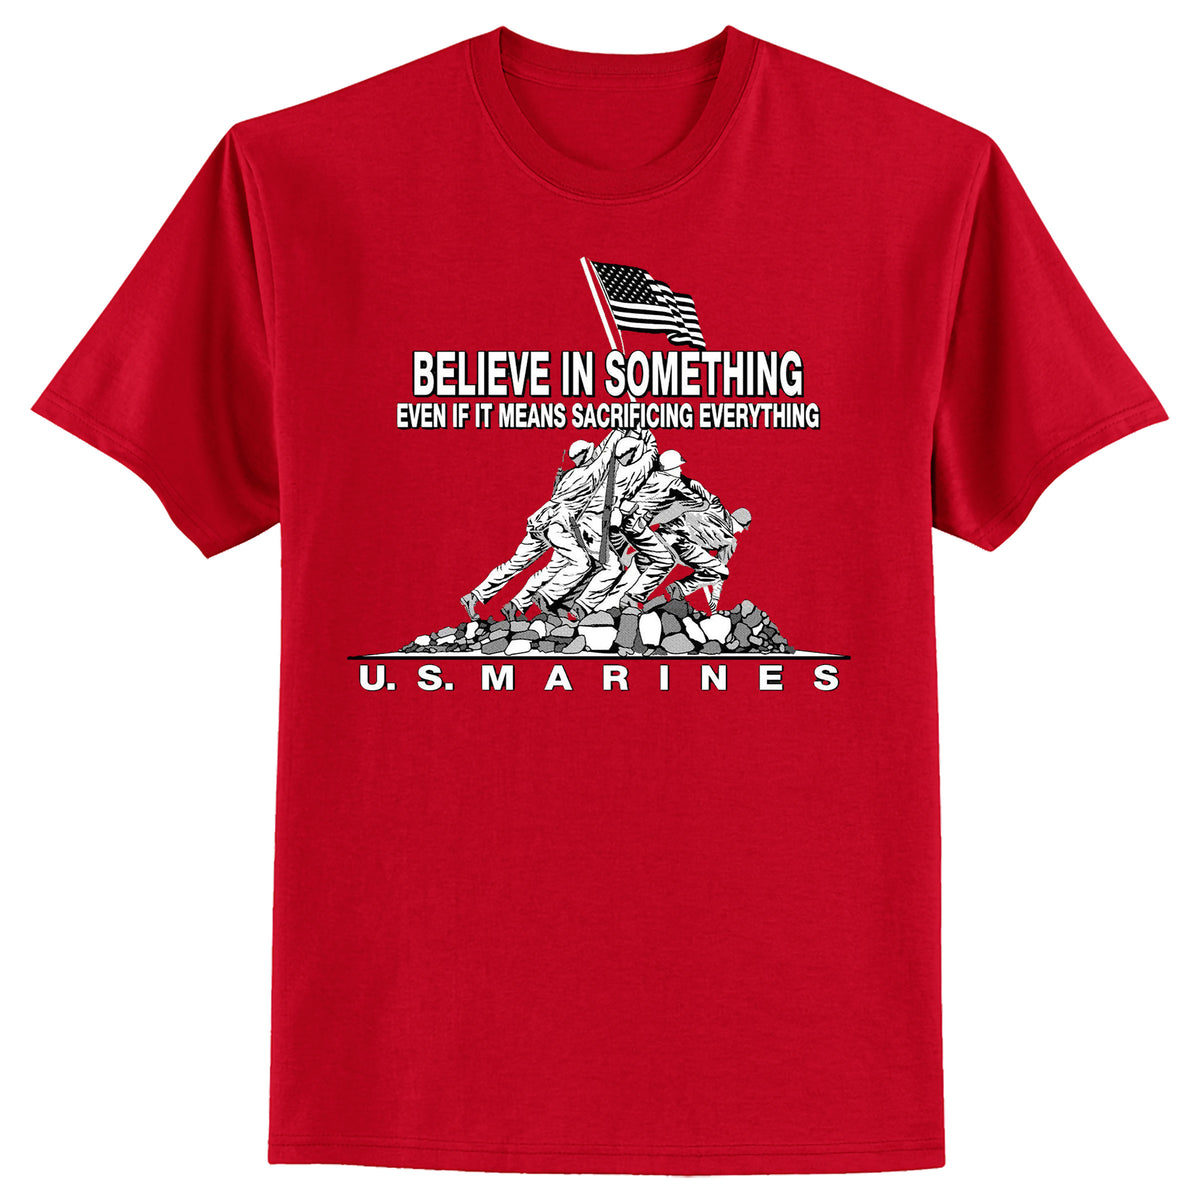 Closeout Believe in Something Red Tee